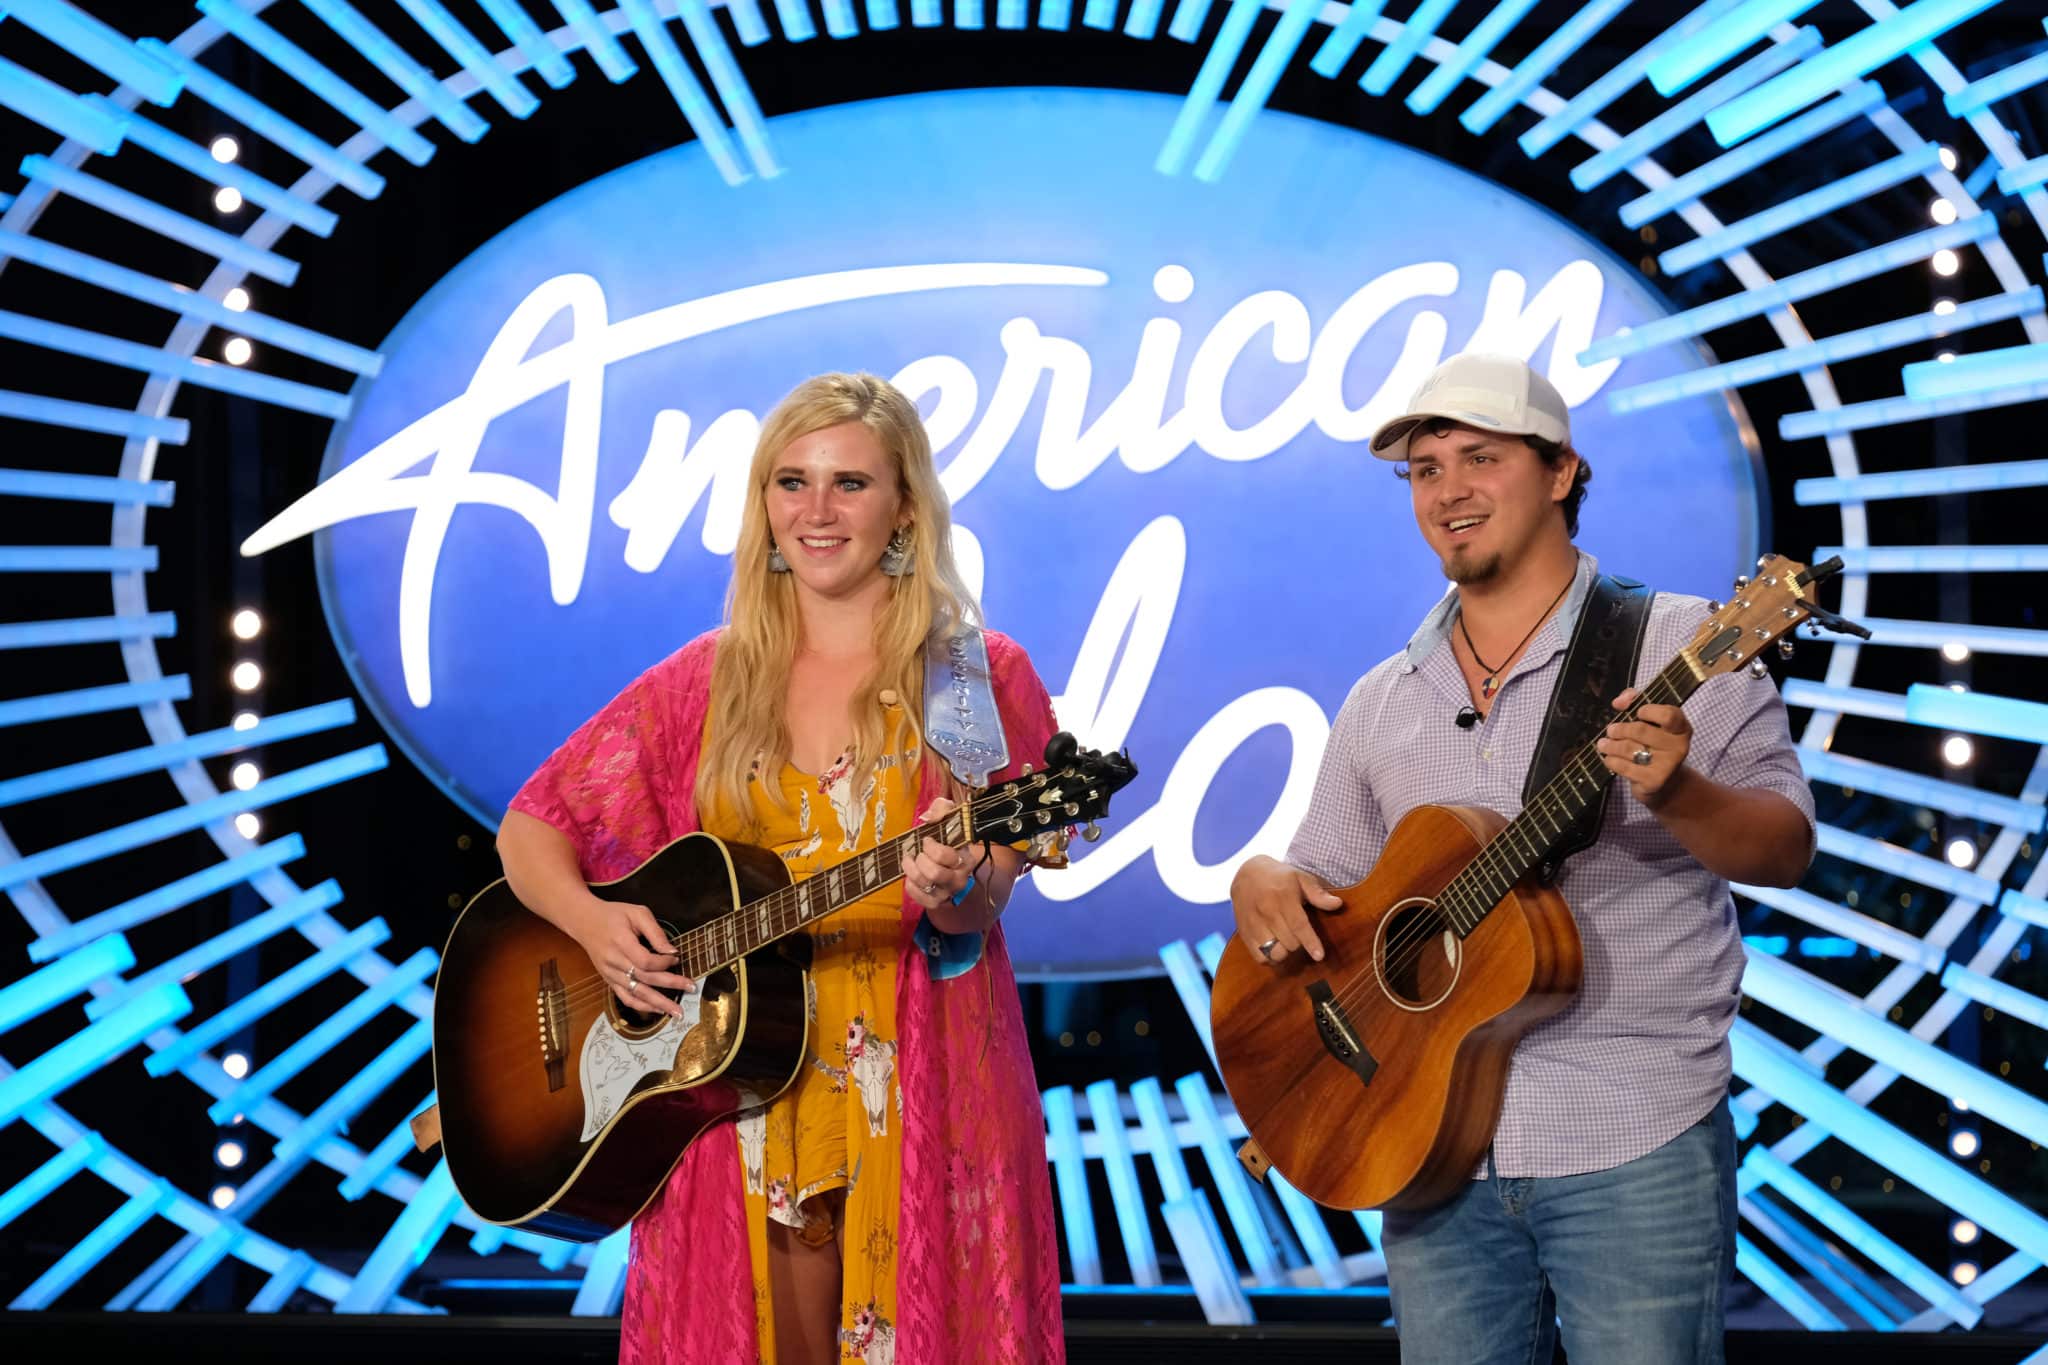 American Idol 2020 Auditions 2 Preview Meet the Contestants! (PHOTOS)